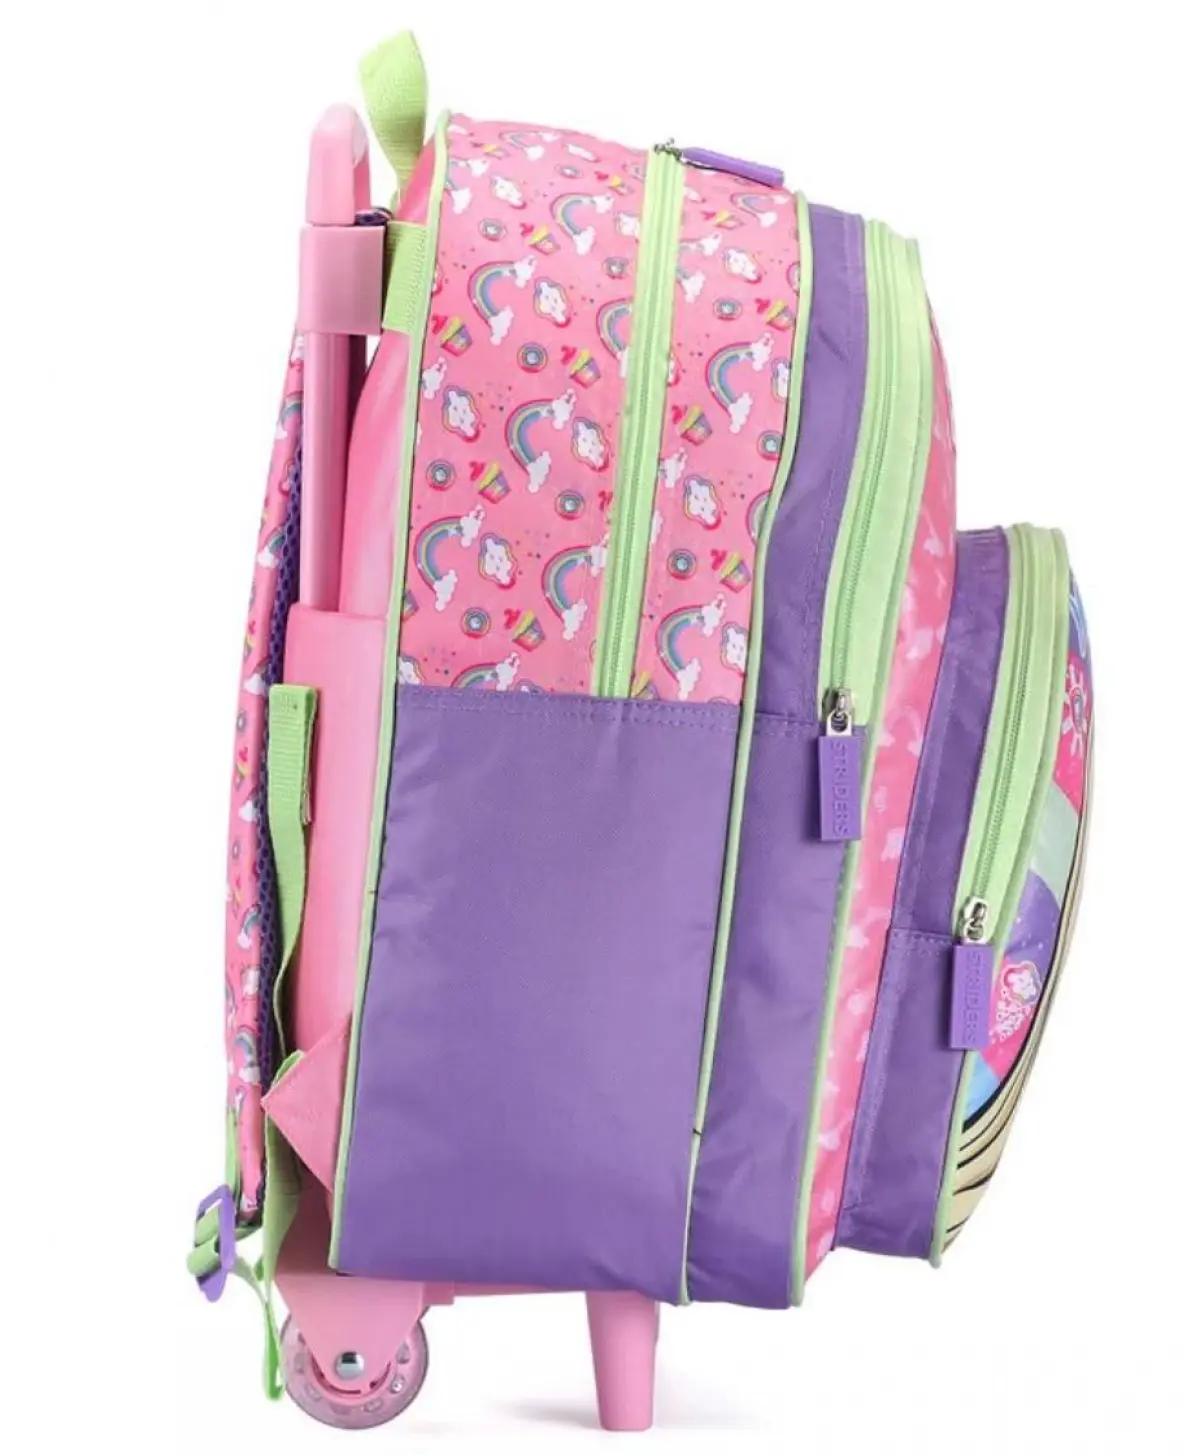 Striders 16 inches Barbie School Trolley Bag Dreams in Style for Little Fashionistas Multicolor For Kids Ages 6Y+